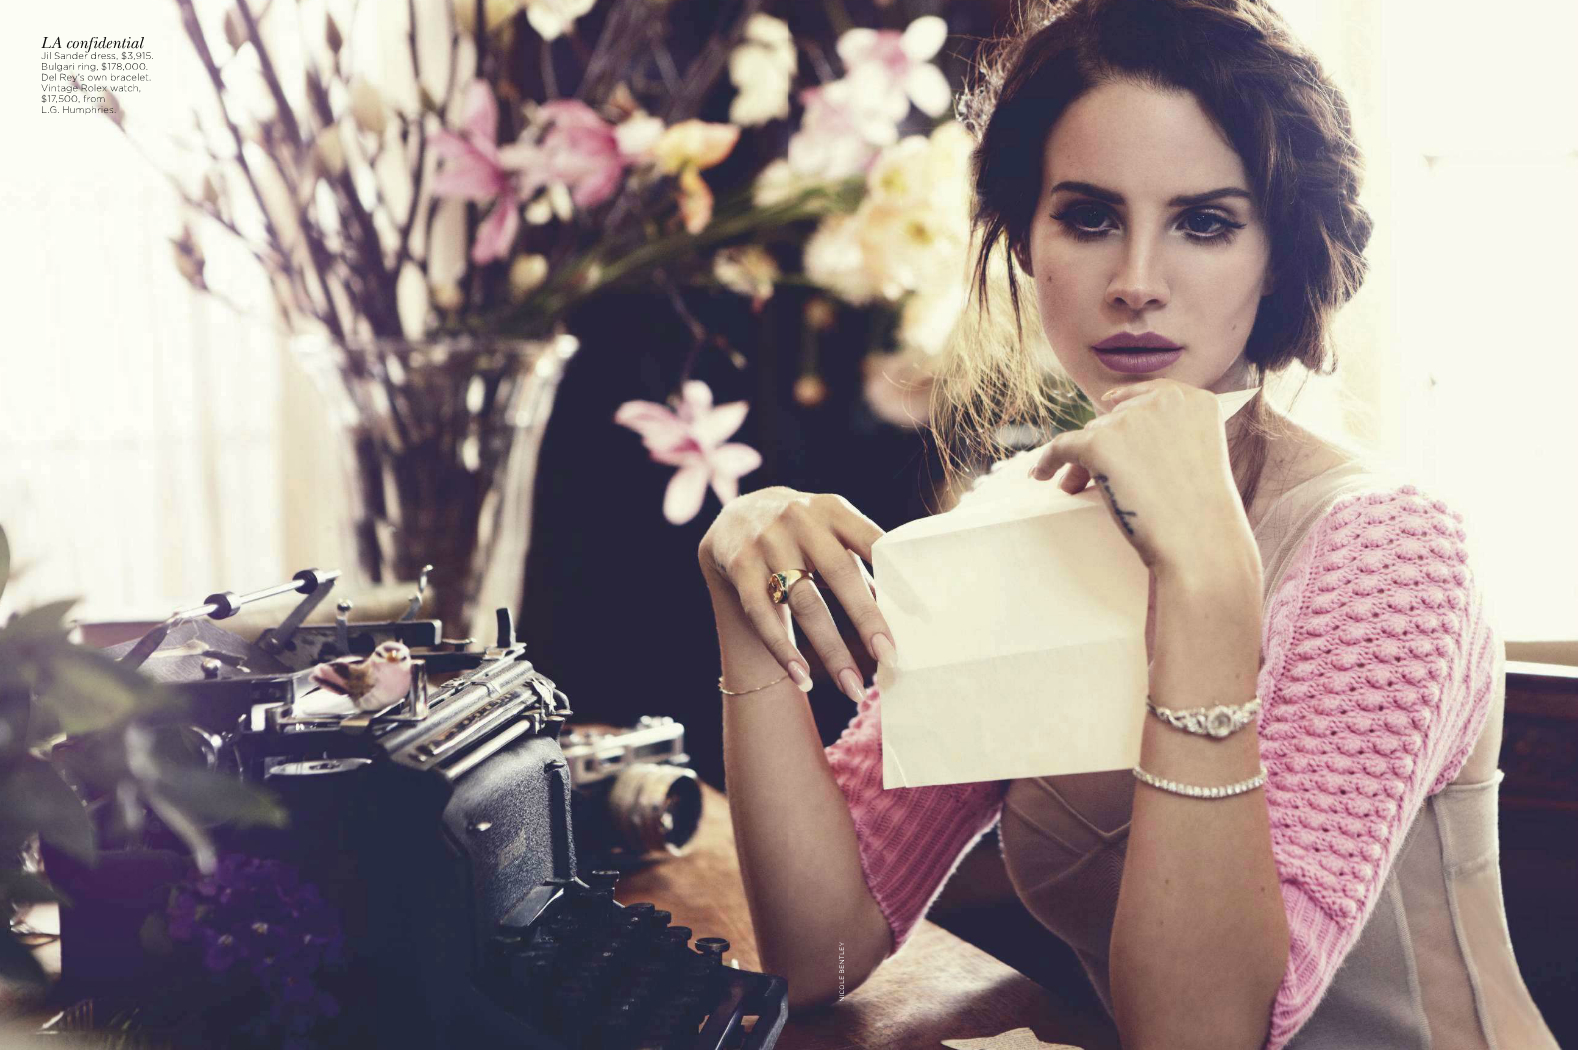 Lana Del Rey Announces 'Honeymoon' Release Date. Music News About HER